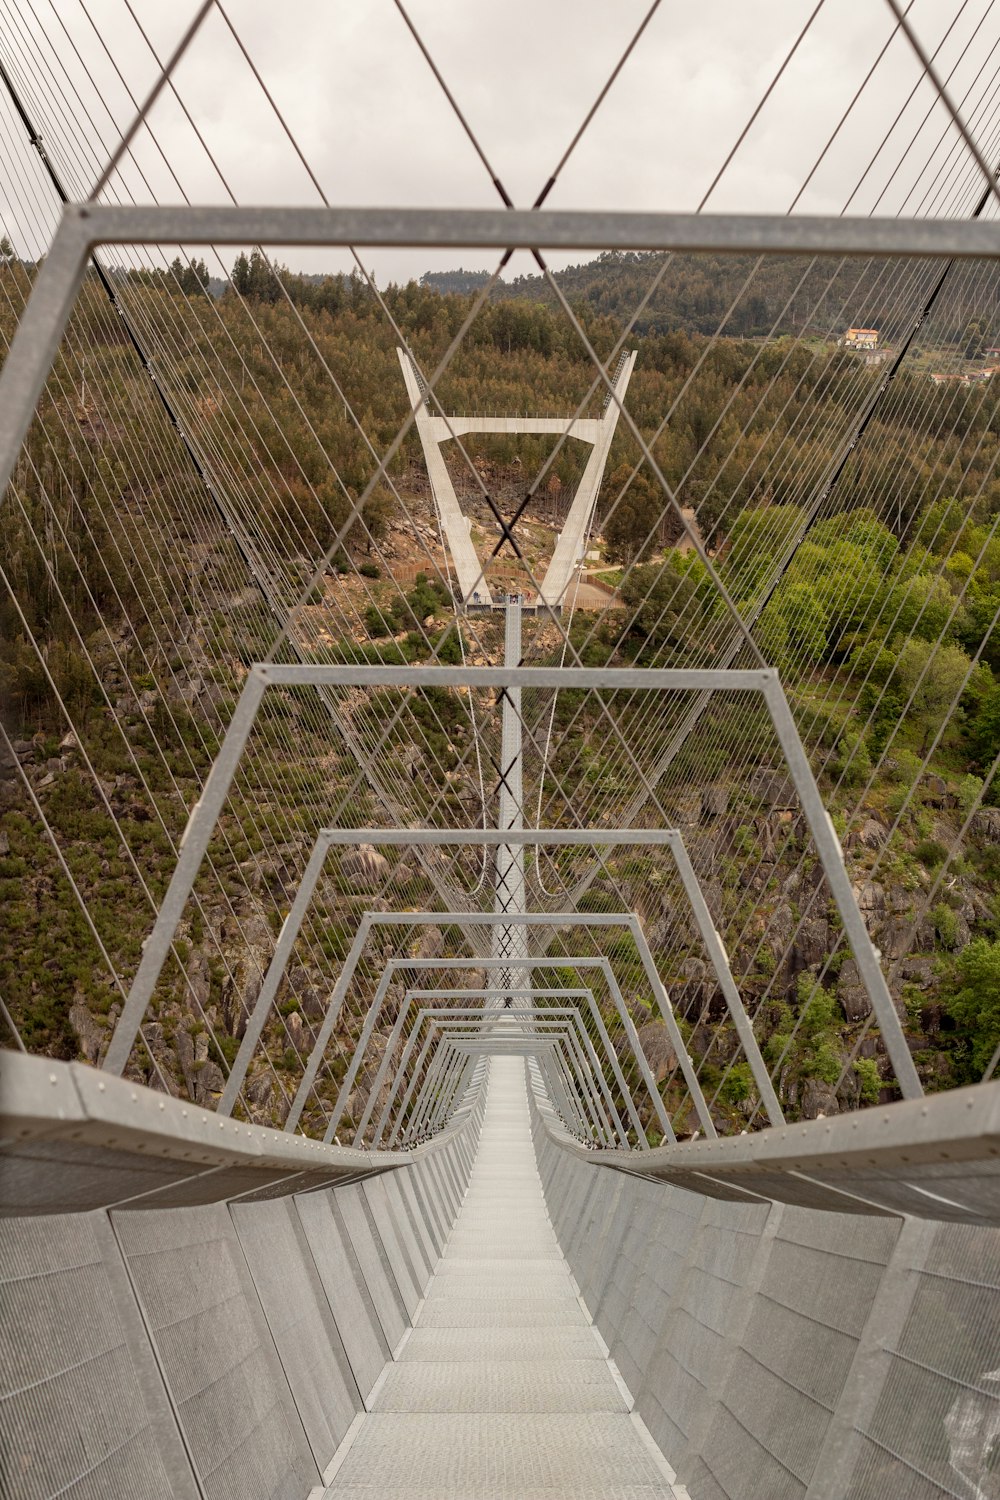 a view from the bottom of a suspension bridge